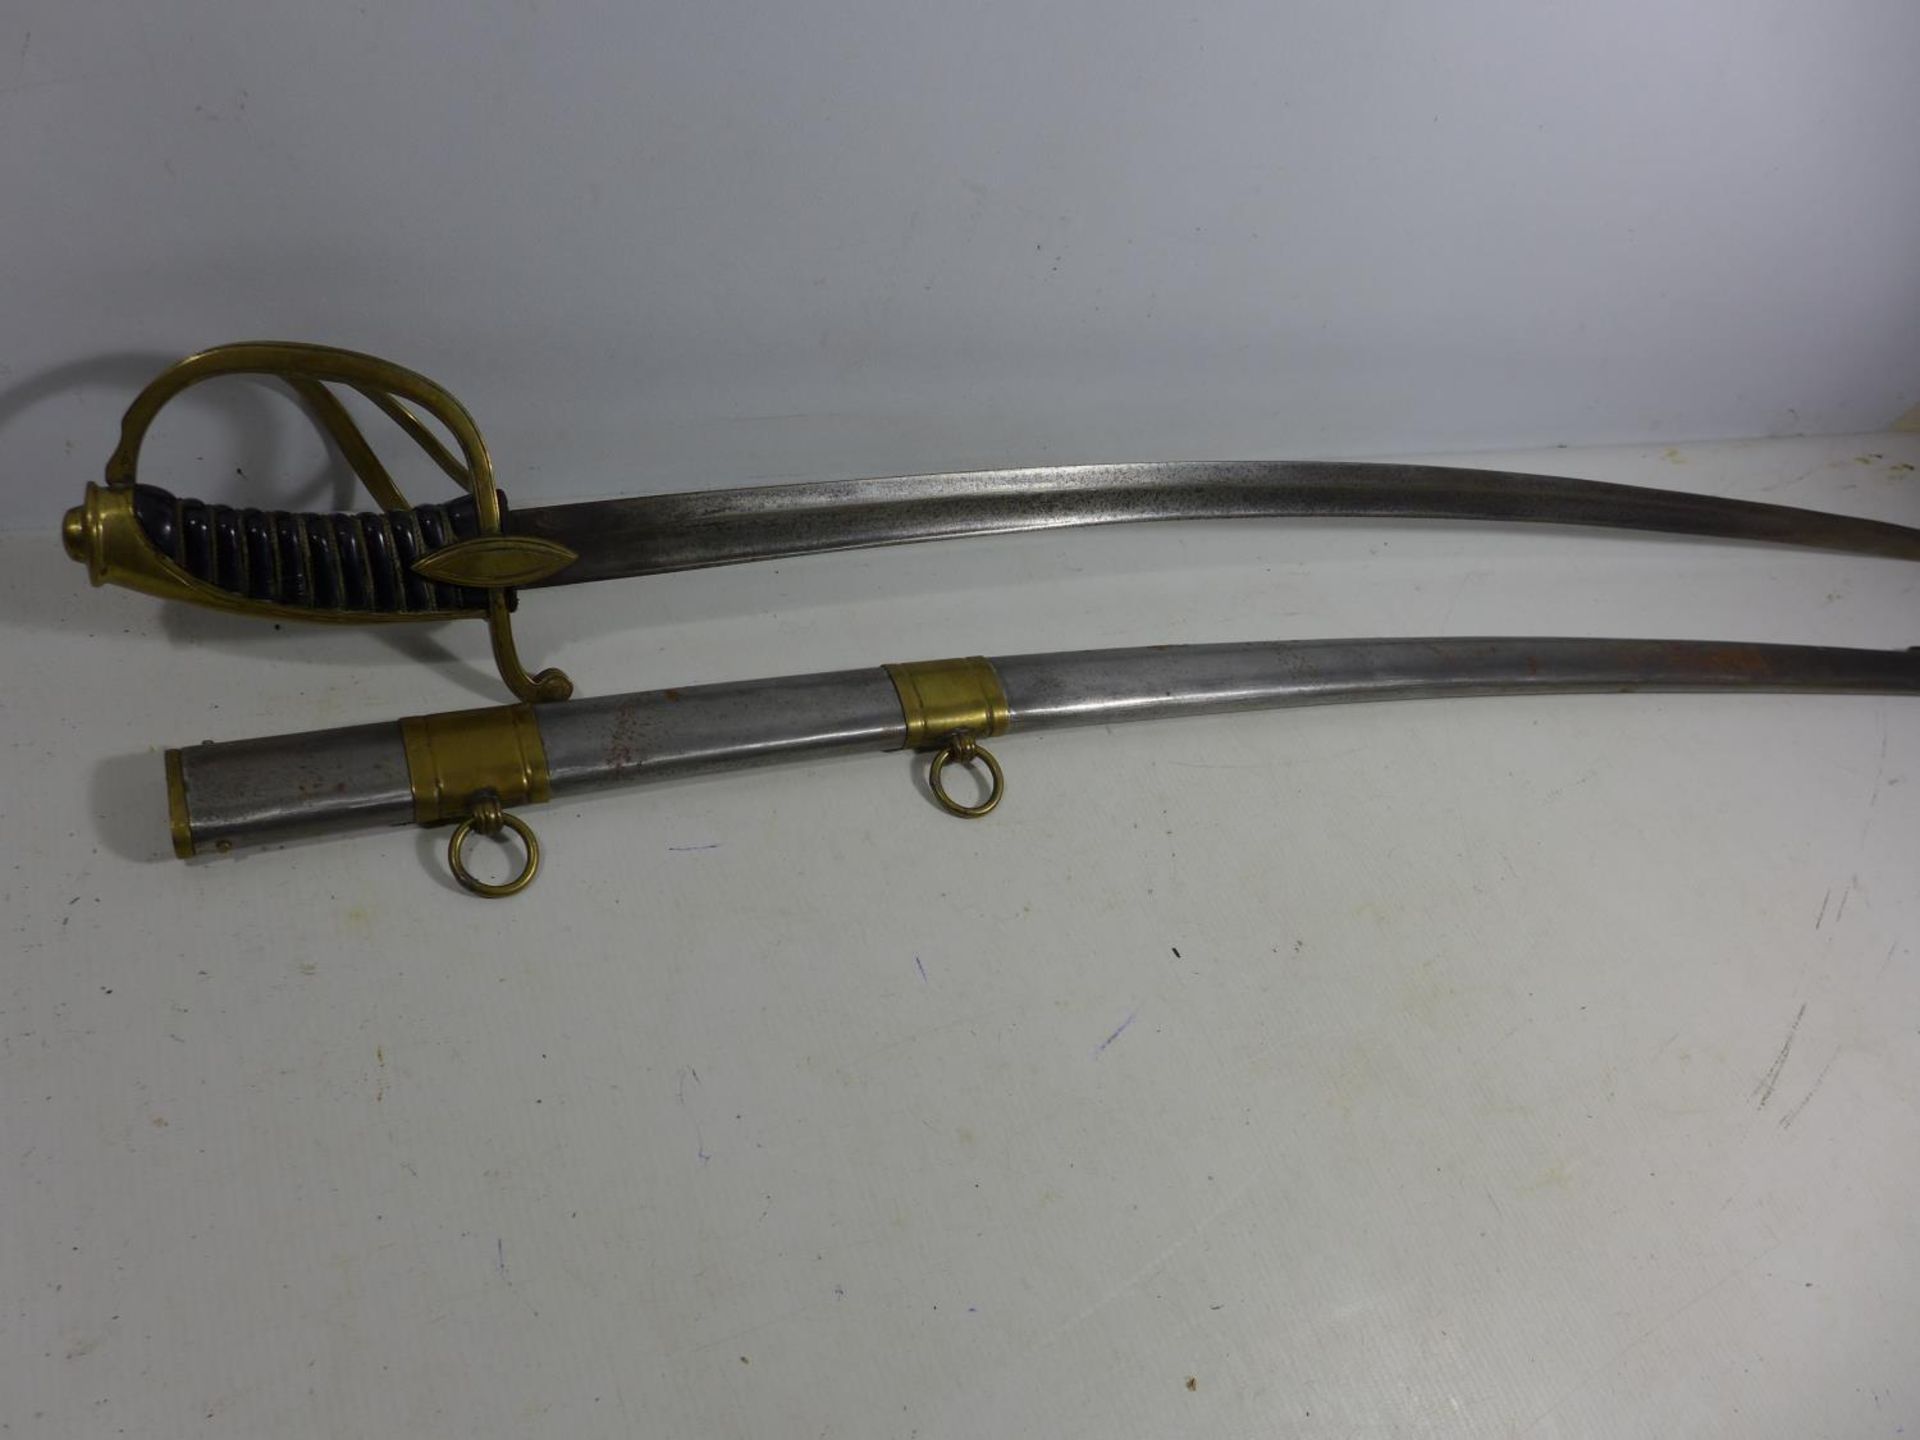 A REPLICA NAPOLEONIC WAR IMPERIAL FRENCH LIGHT CAVALRY SWORD AND SCABBARD, 82CM BLADE, LENGTH 99CM - Image 5 of 6